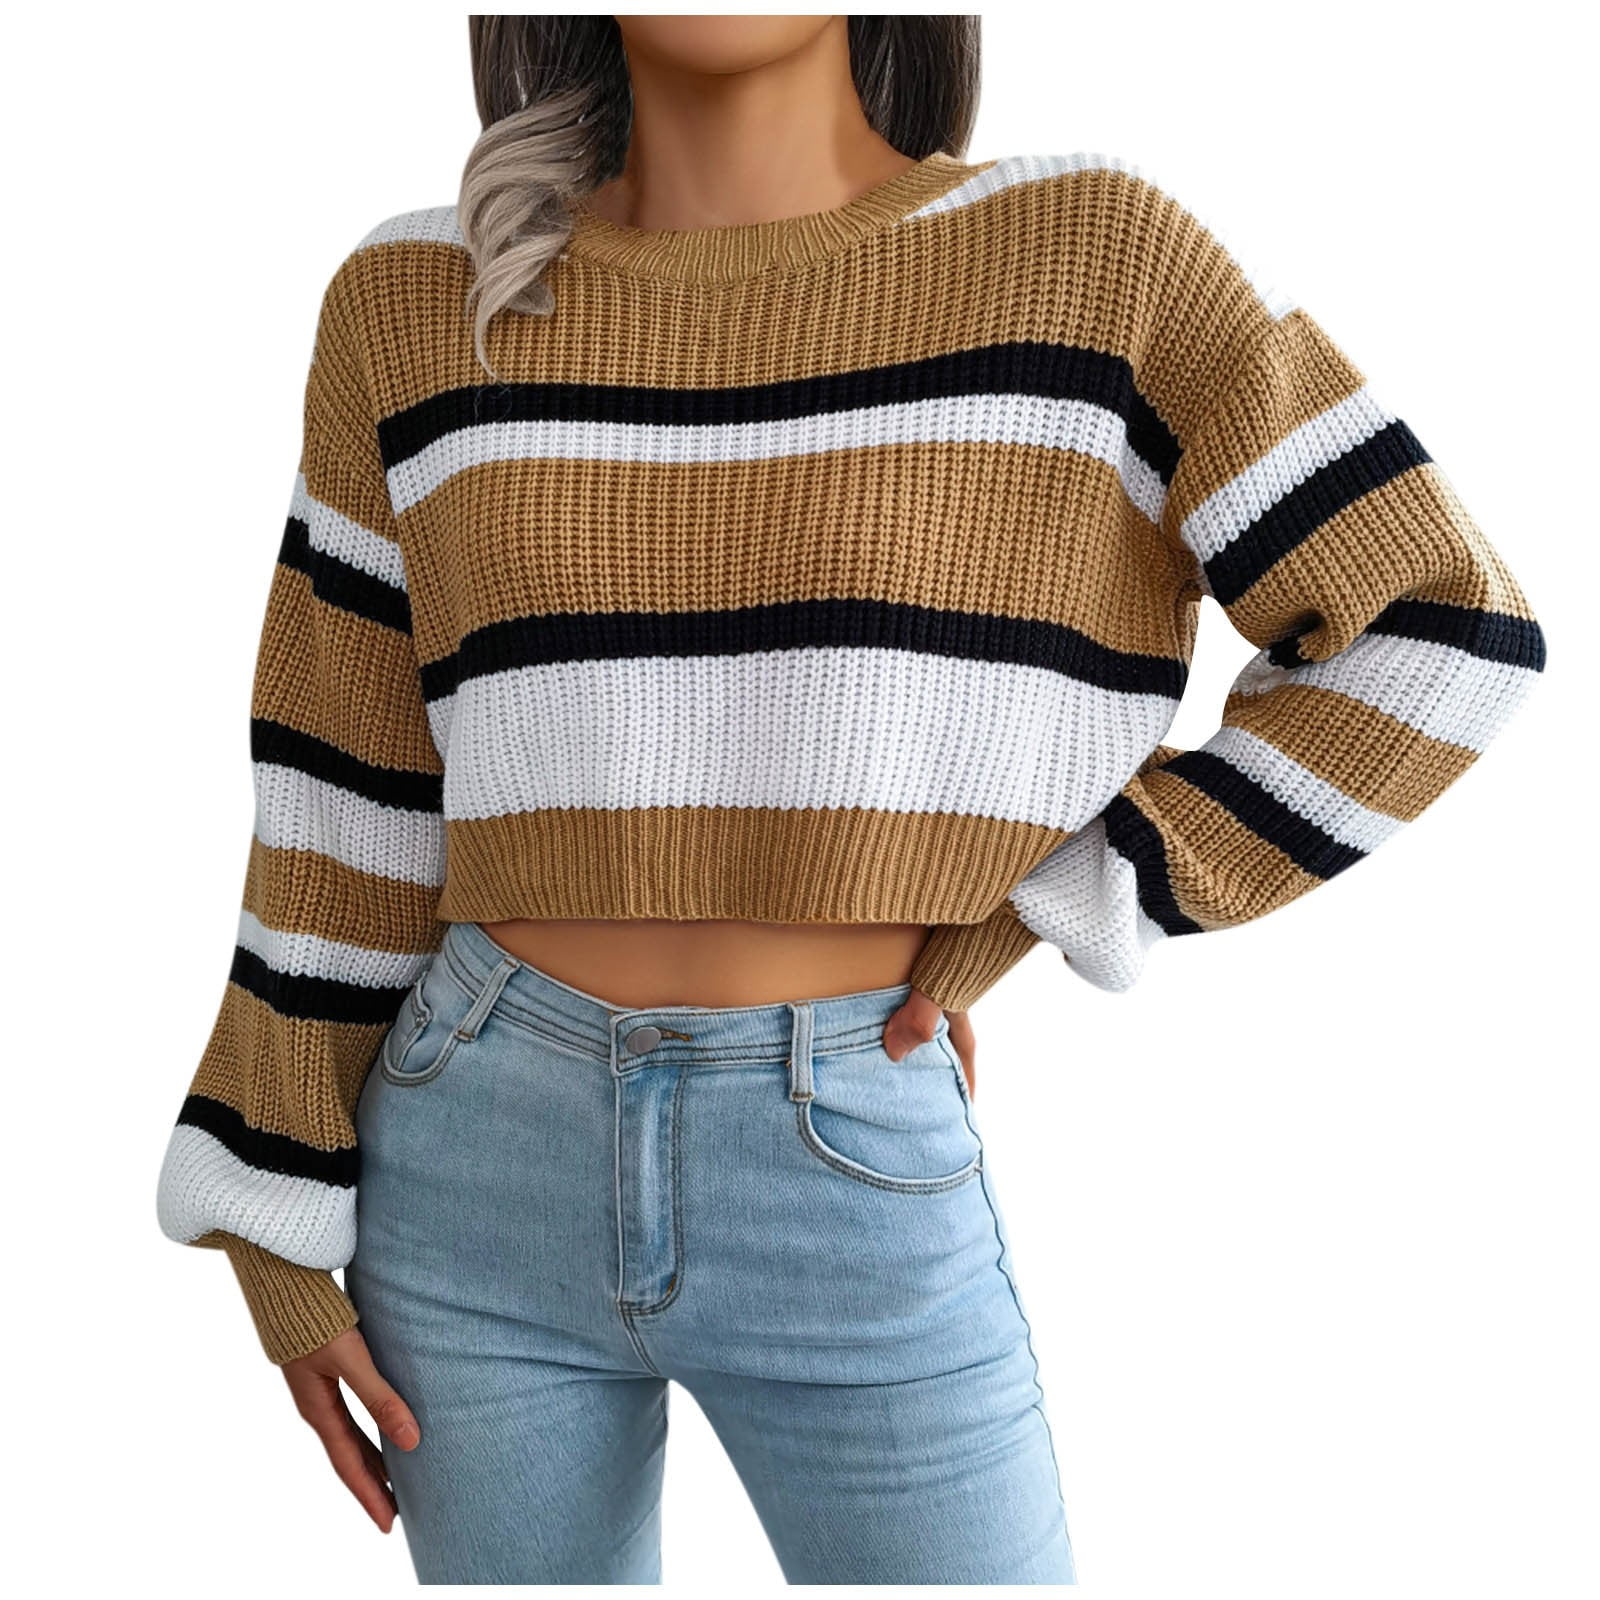 Fall Clothes, Women's Cardigan Ropa De Invierno Mujer Making The Cut Shop Winning Looks Women's Autumn Winter Top Ins Style Casual Striped Long Sleeve Crop Knit (S, Khaki) TBKOMH -